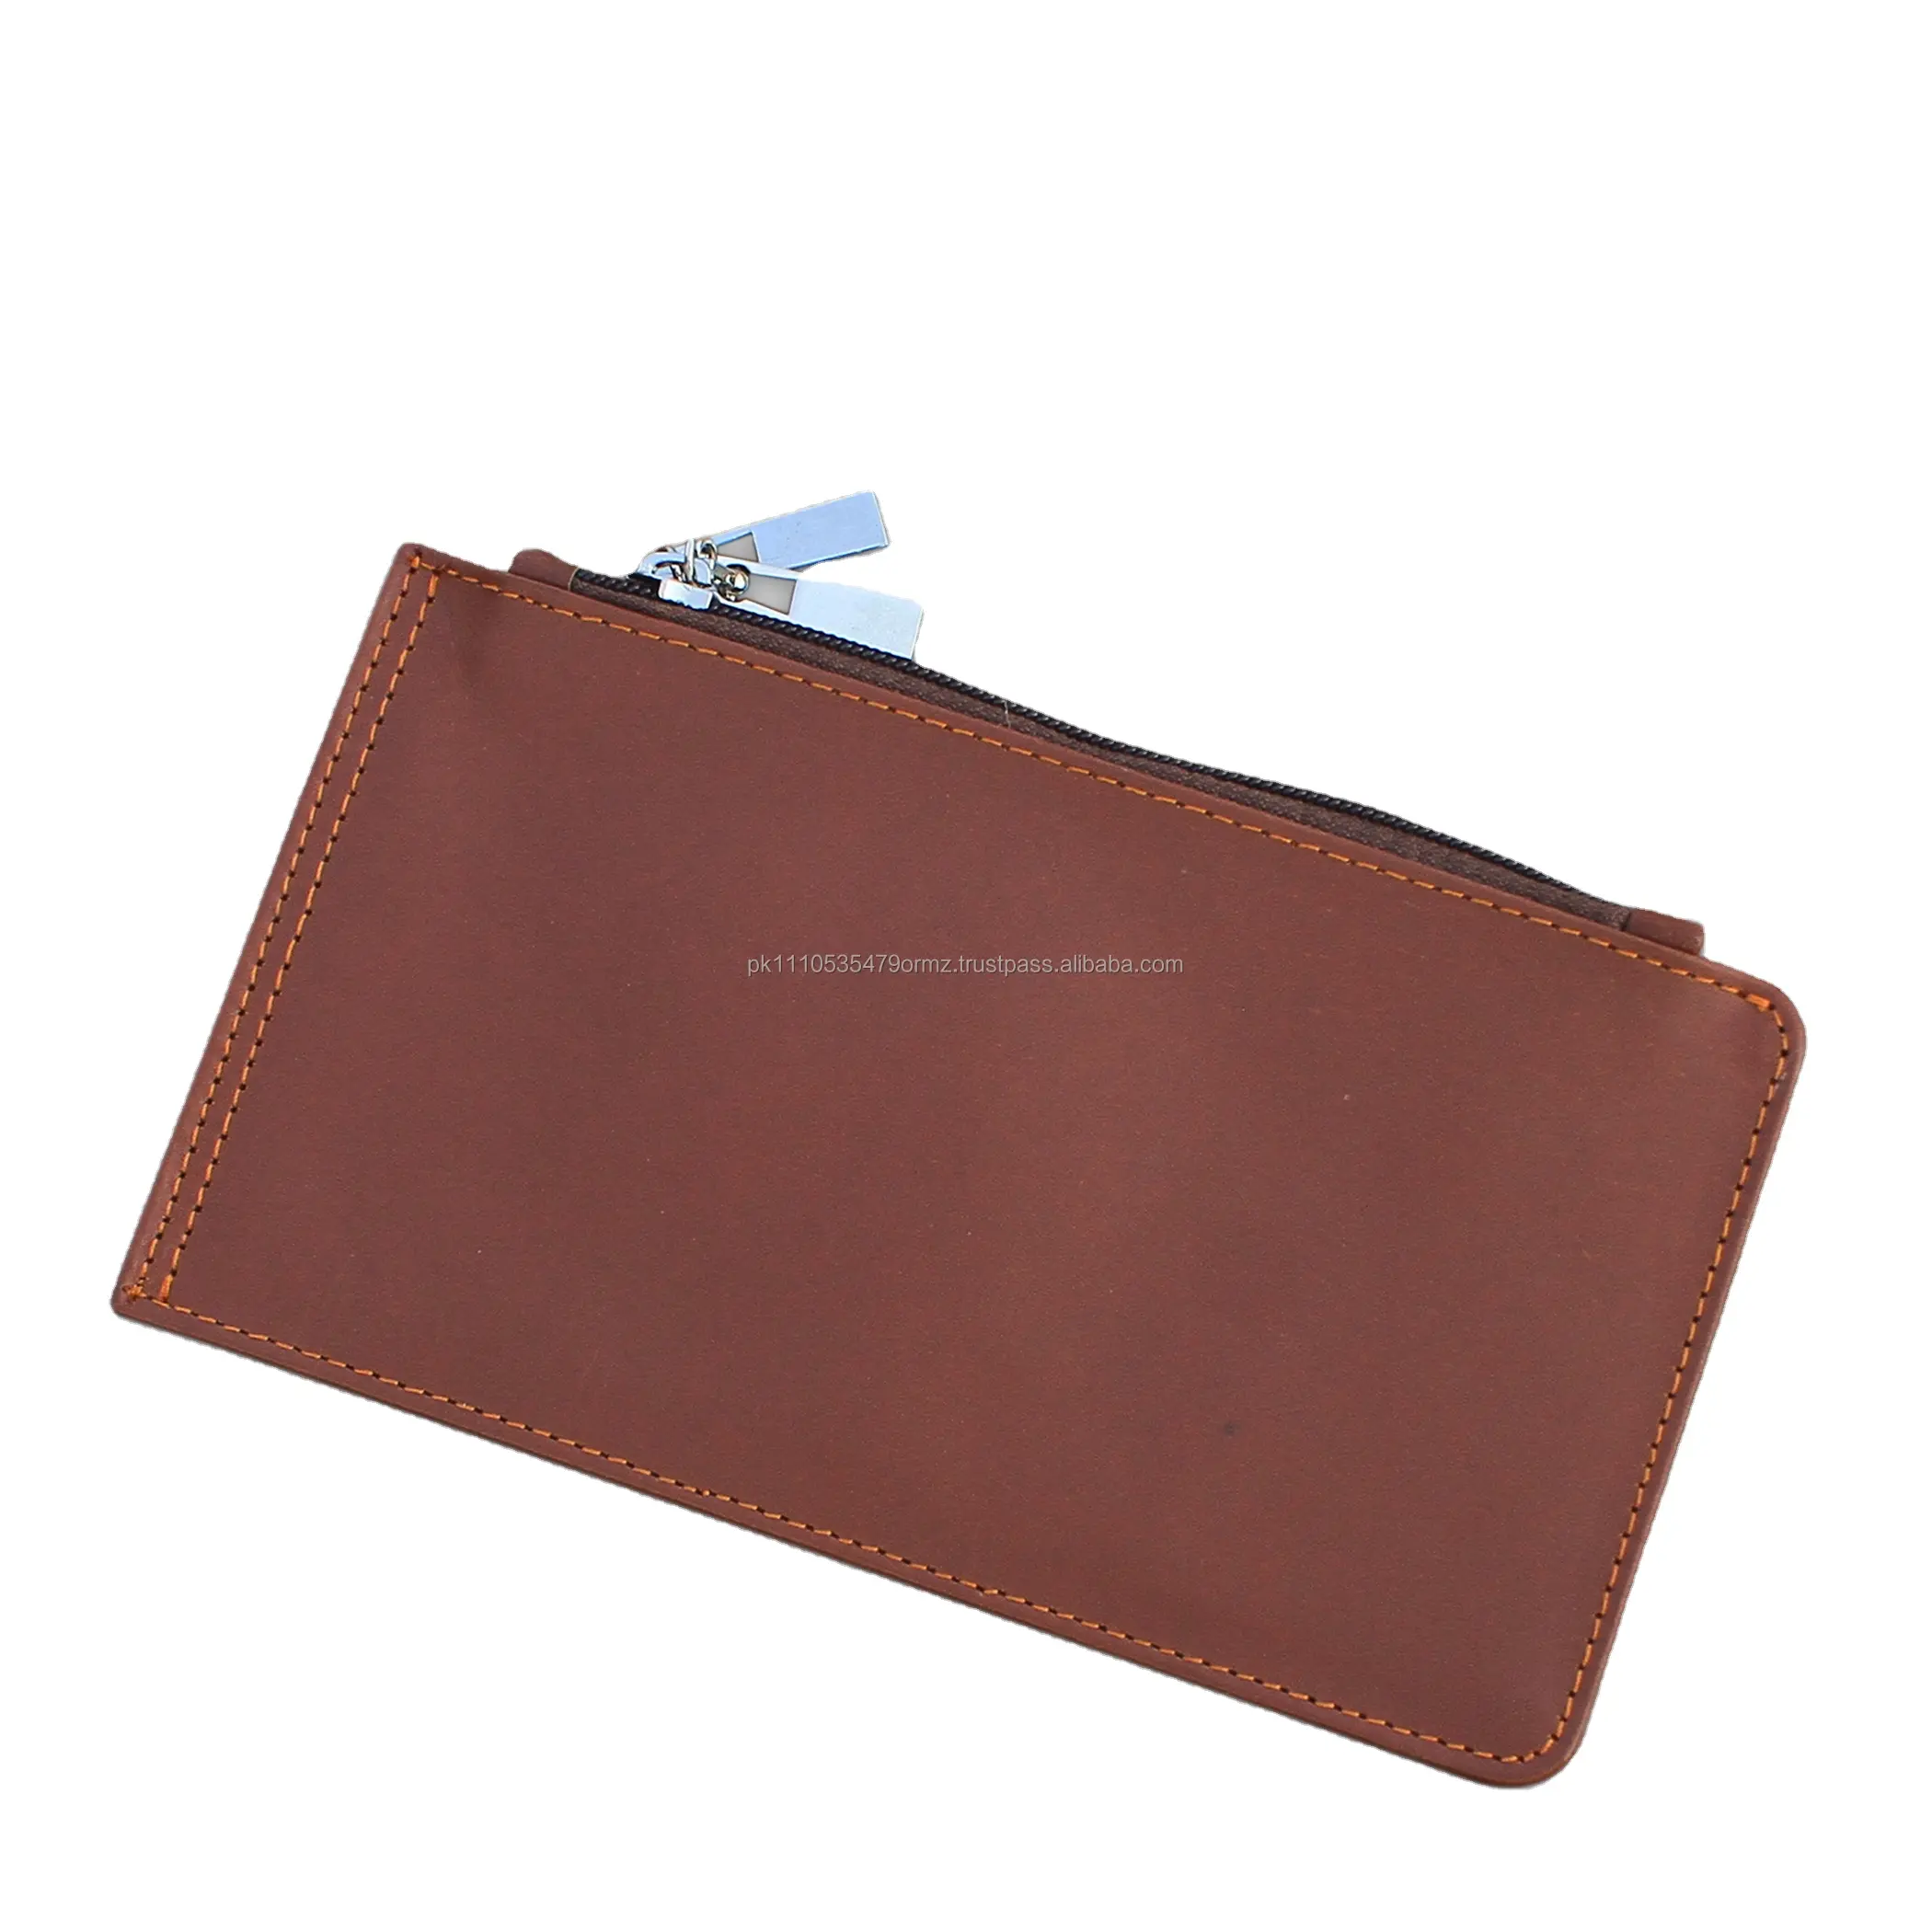 High Quality Travel passport Wallet In Fashion Super trendy Potable and easy to carry High recommended